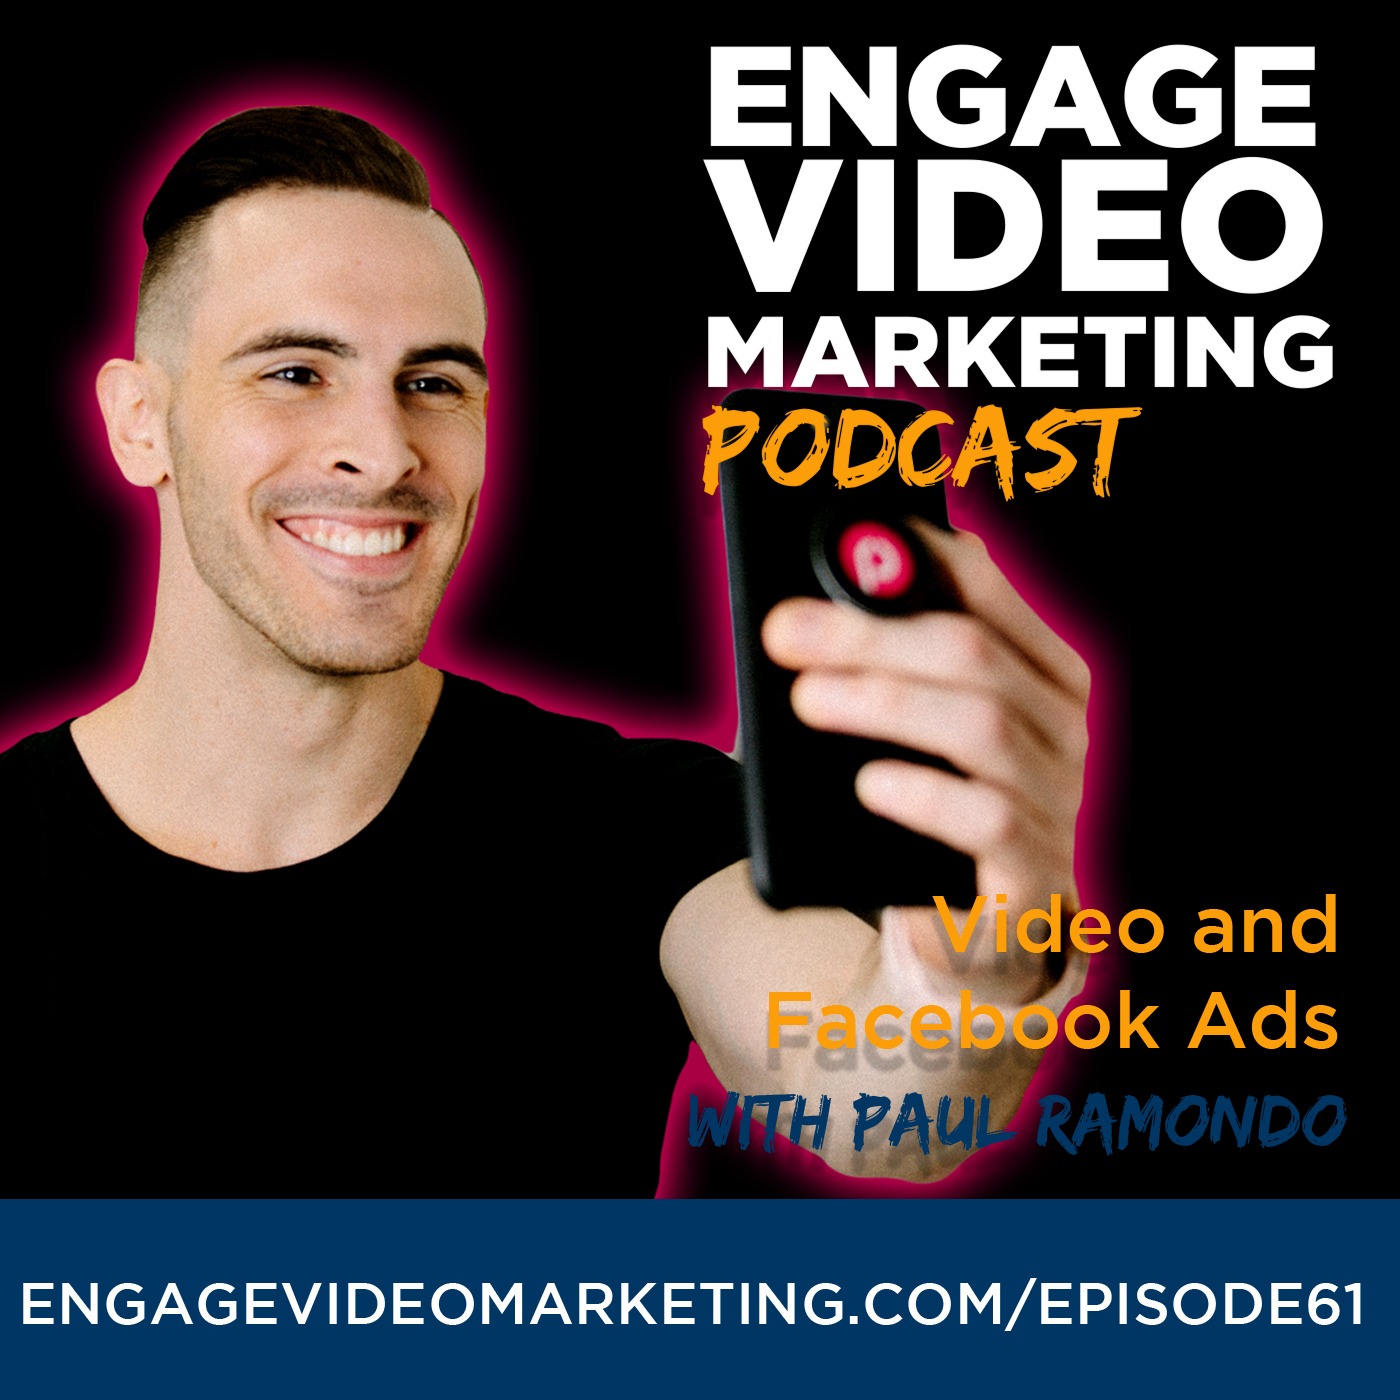 Video and Facebook Ads with Paul Ramondo